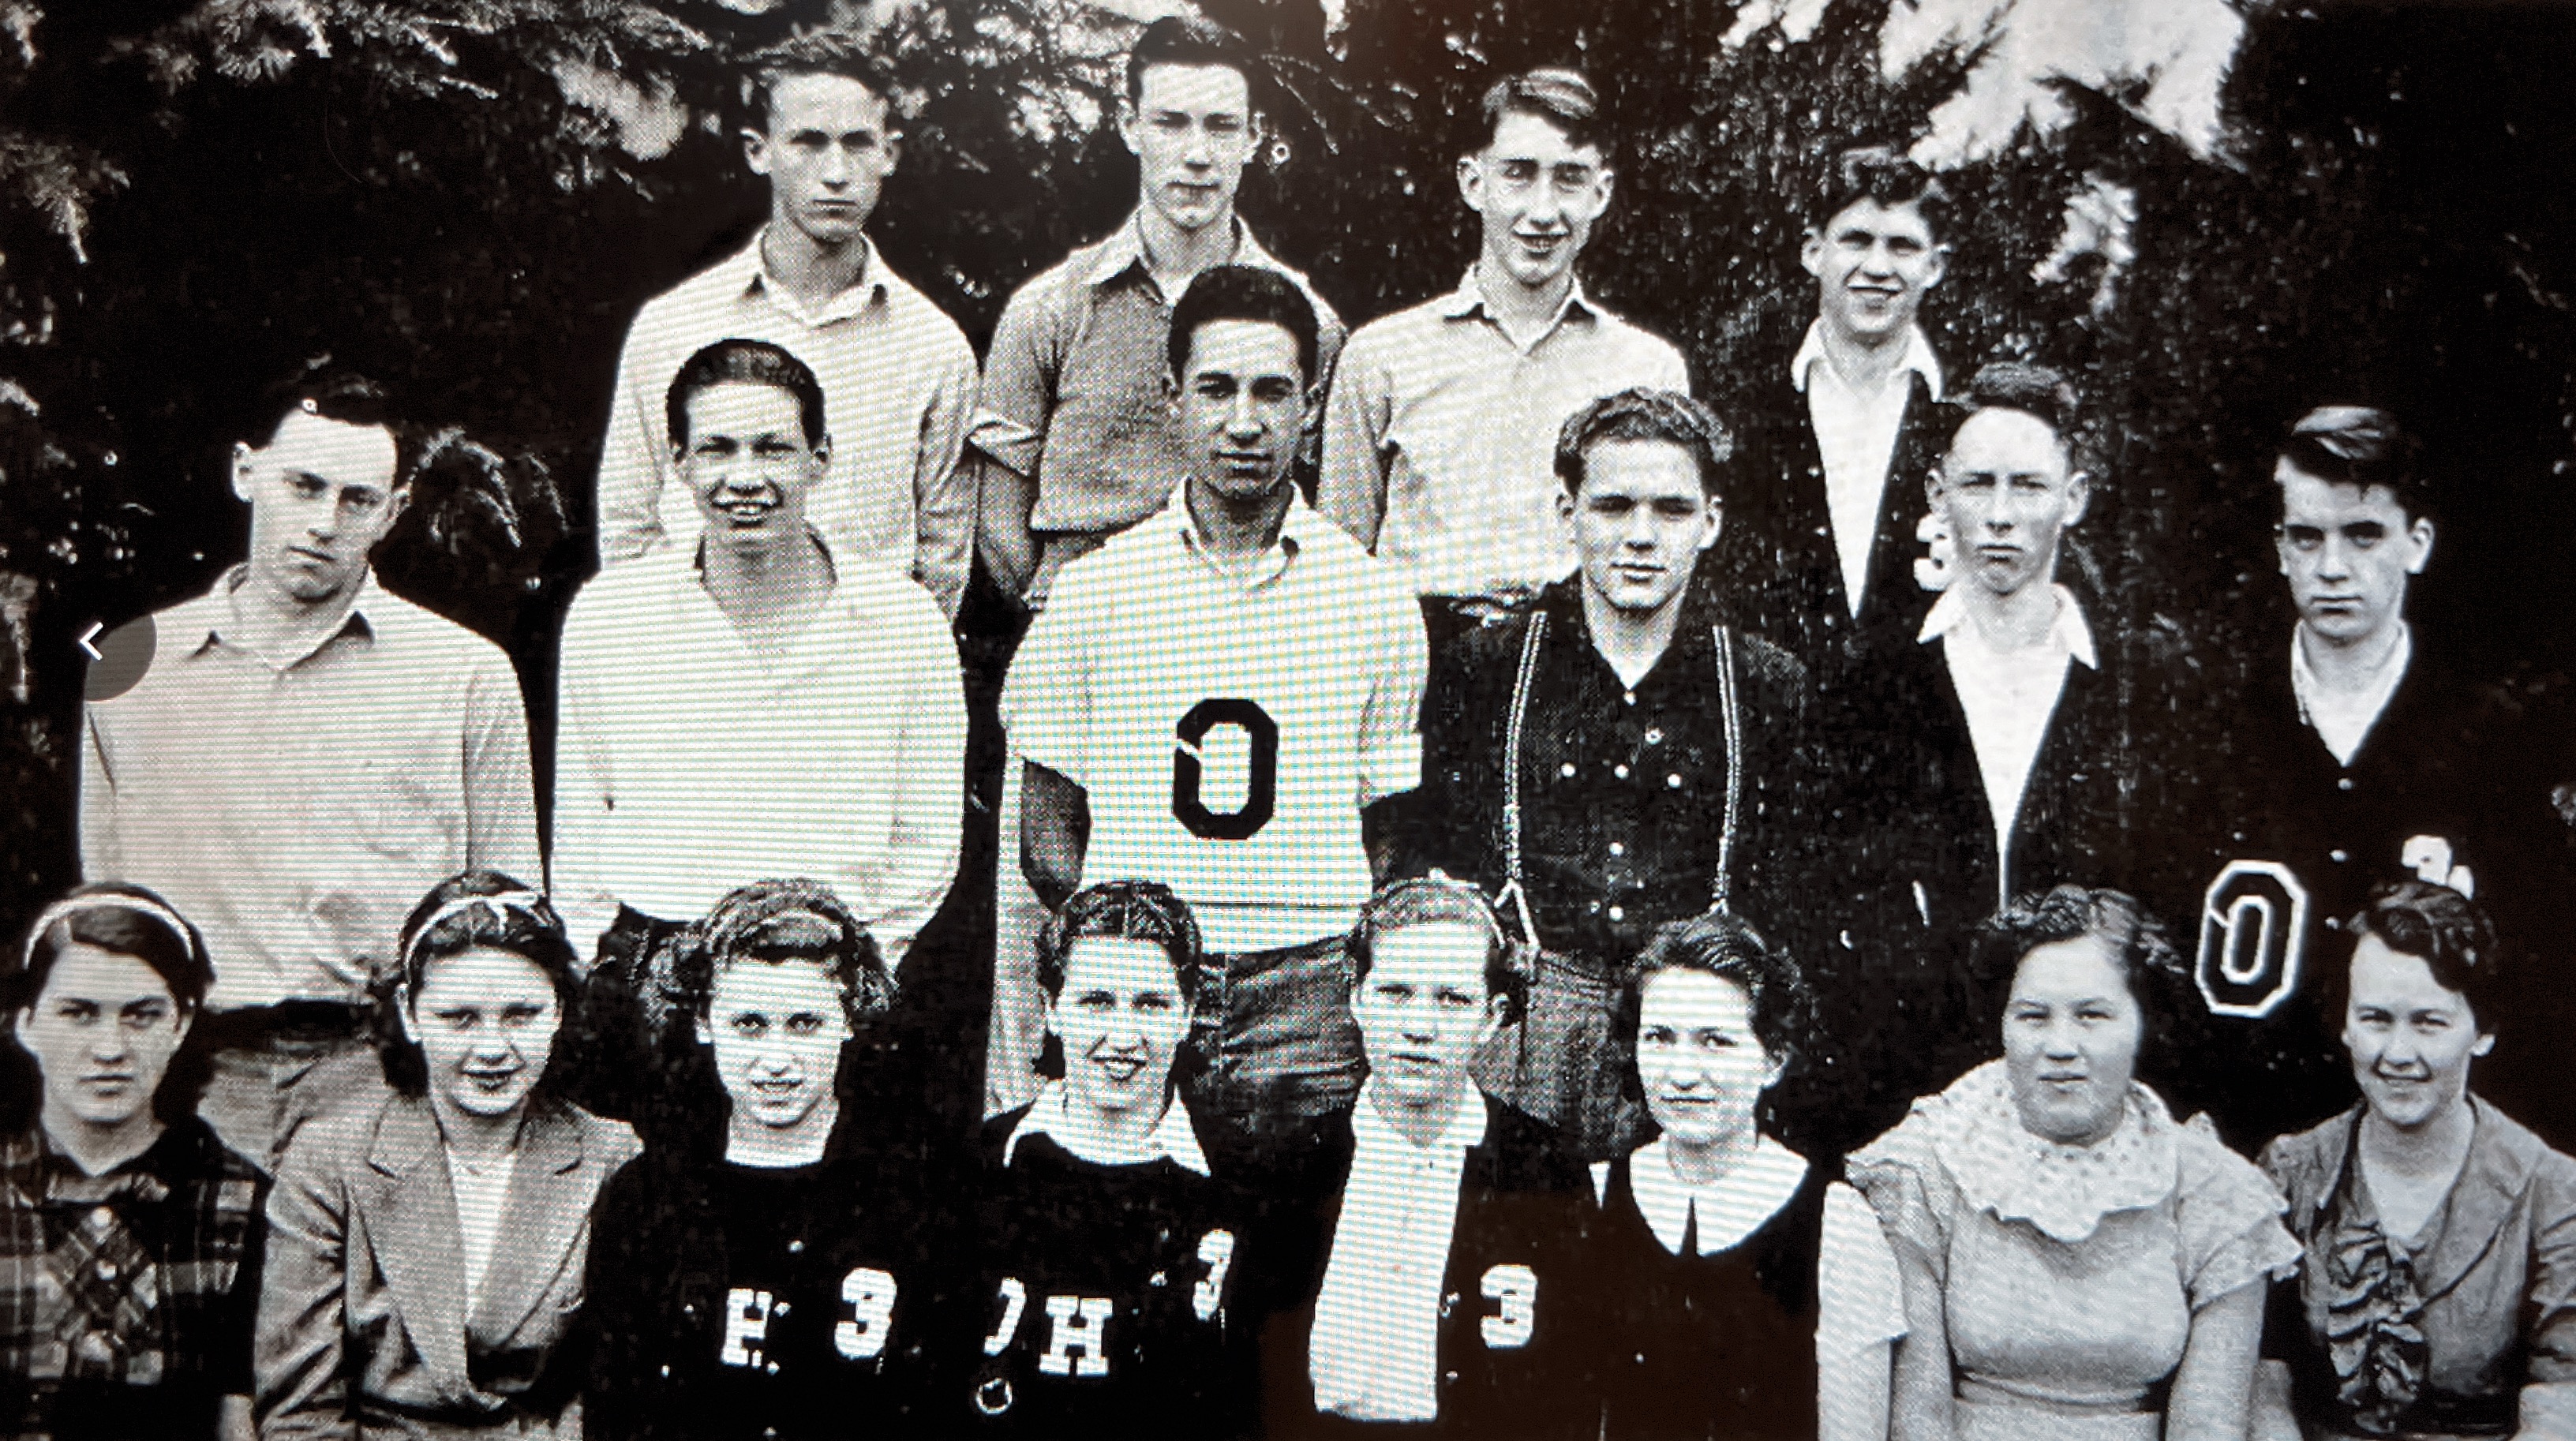 Class of 1938 in their junior class photo.  Lester is second from left in the middle row.